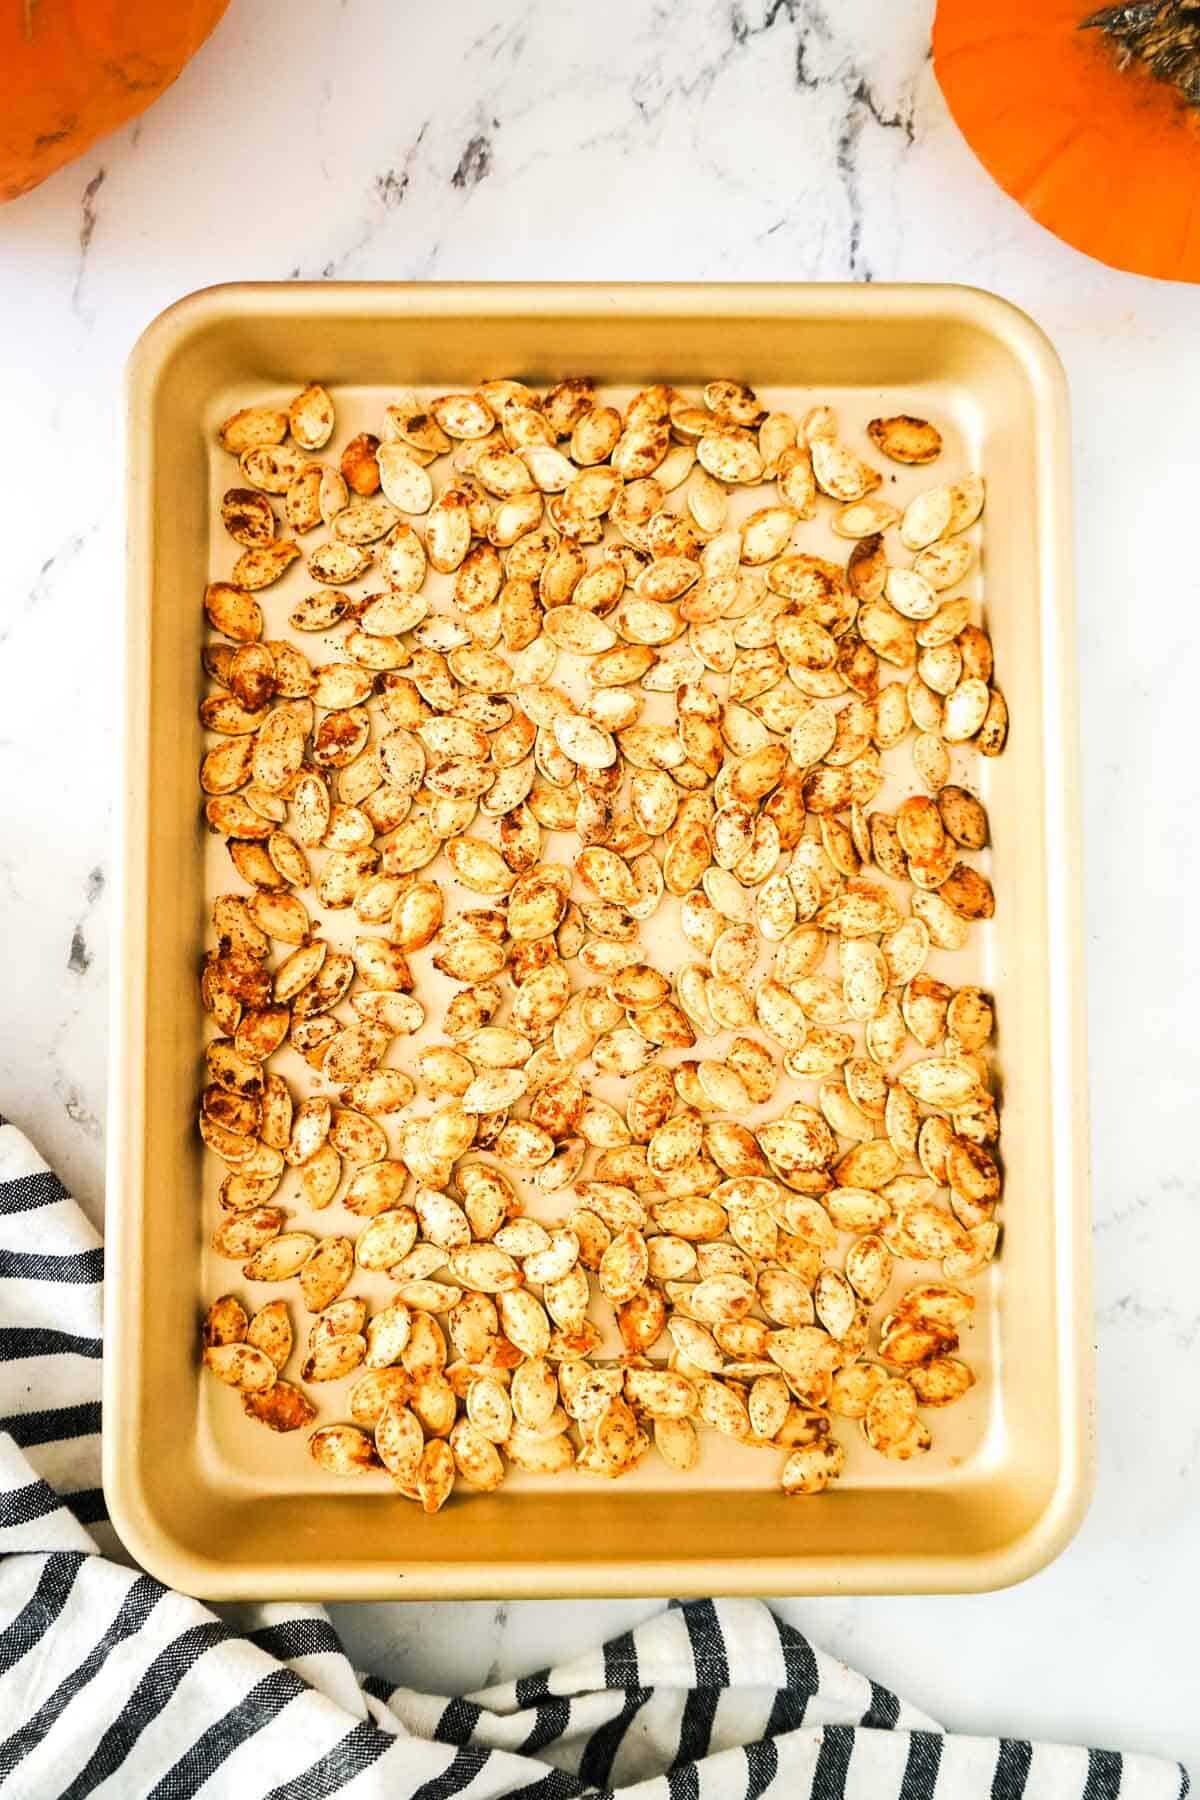 Smoked pumpkin seeds after being smoked on a baking sheet.